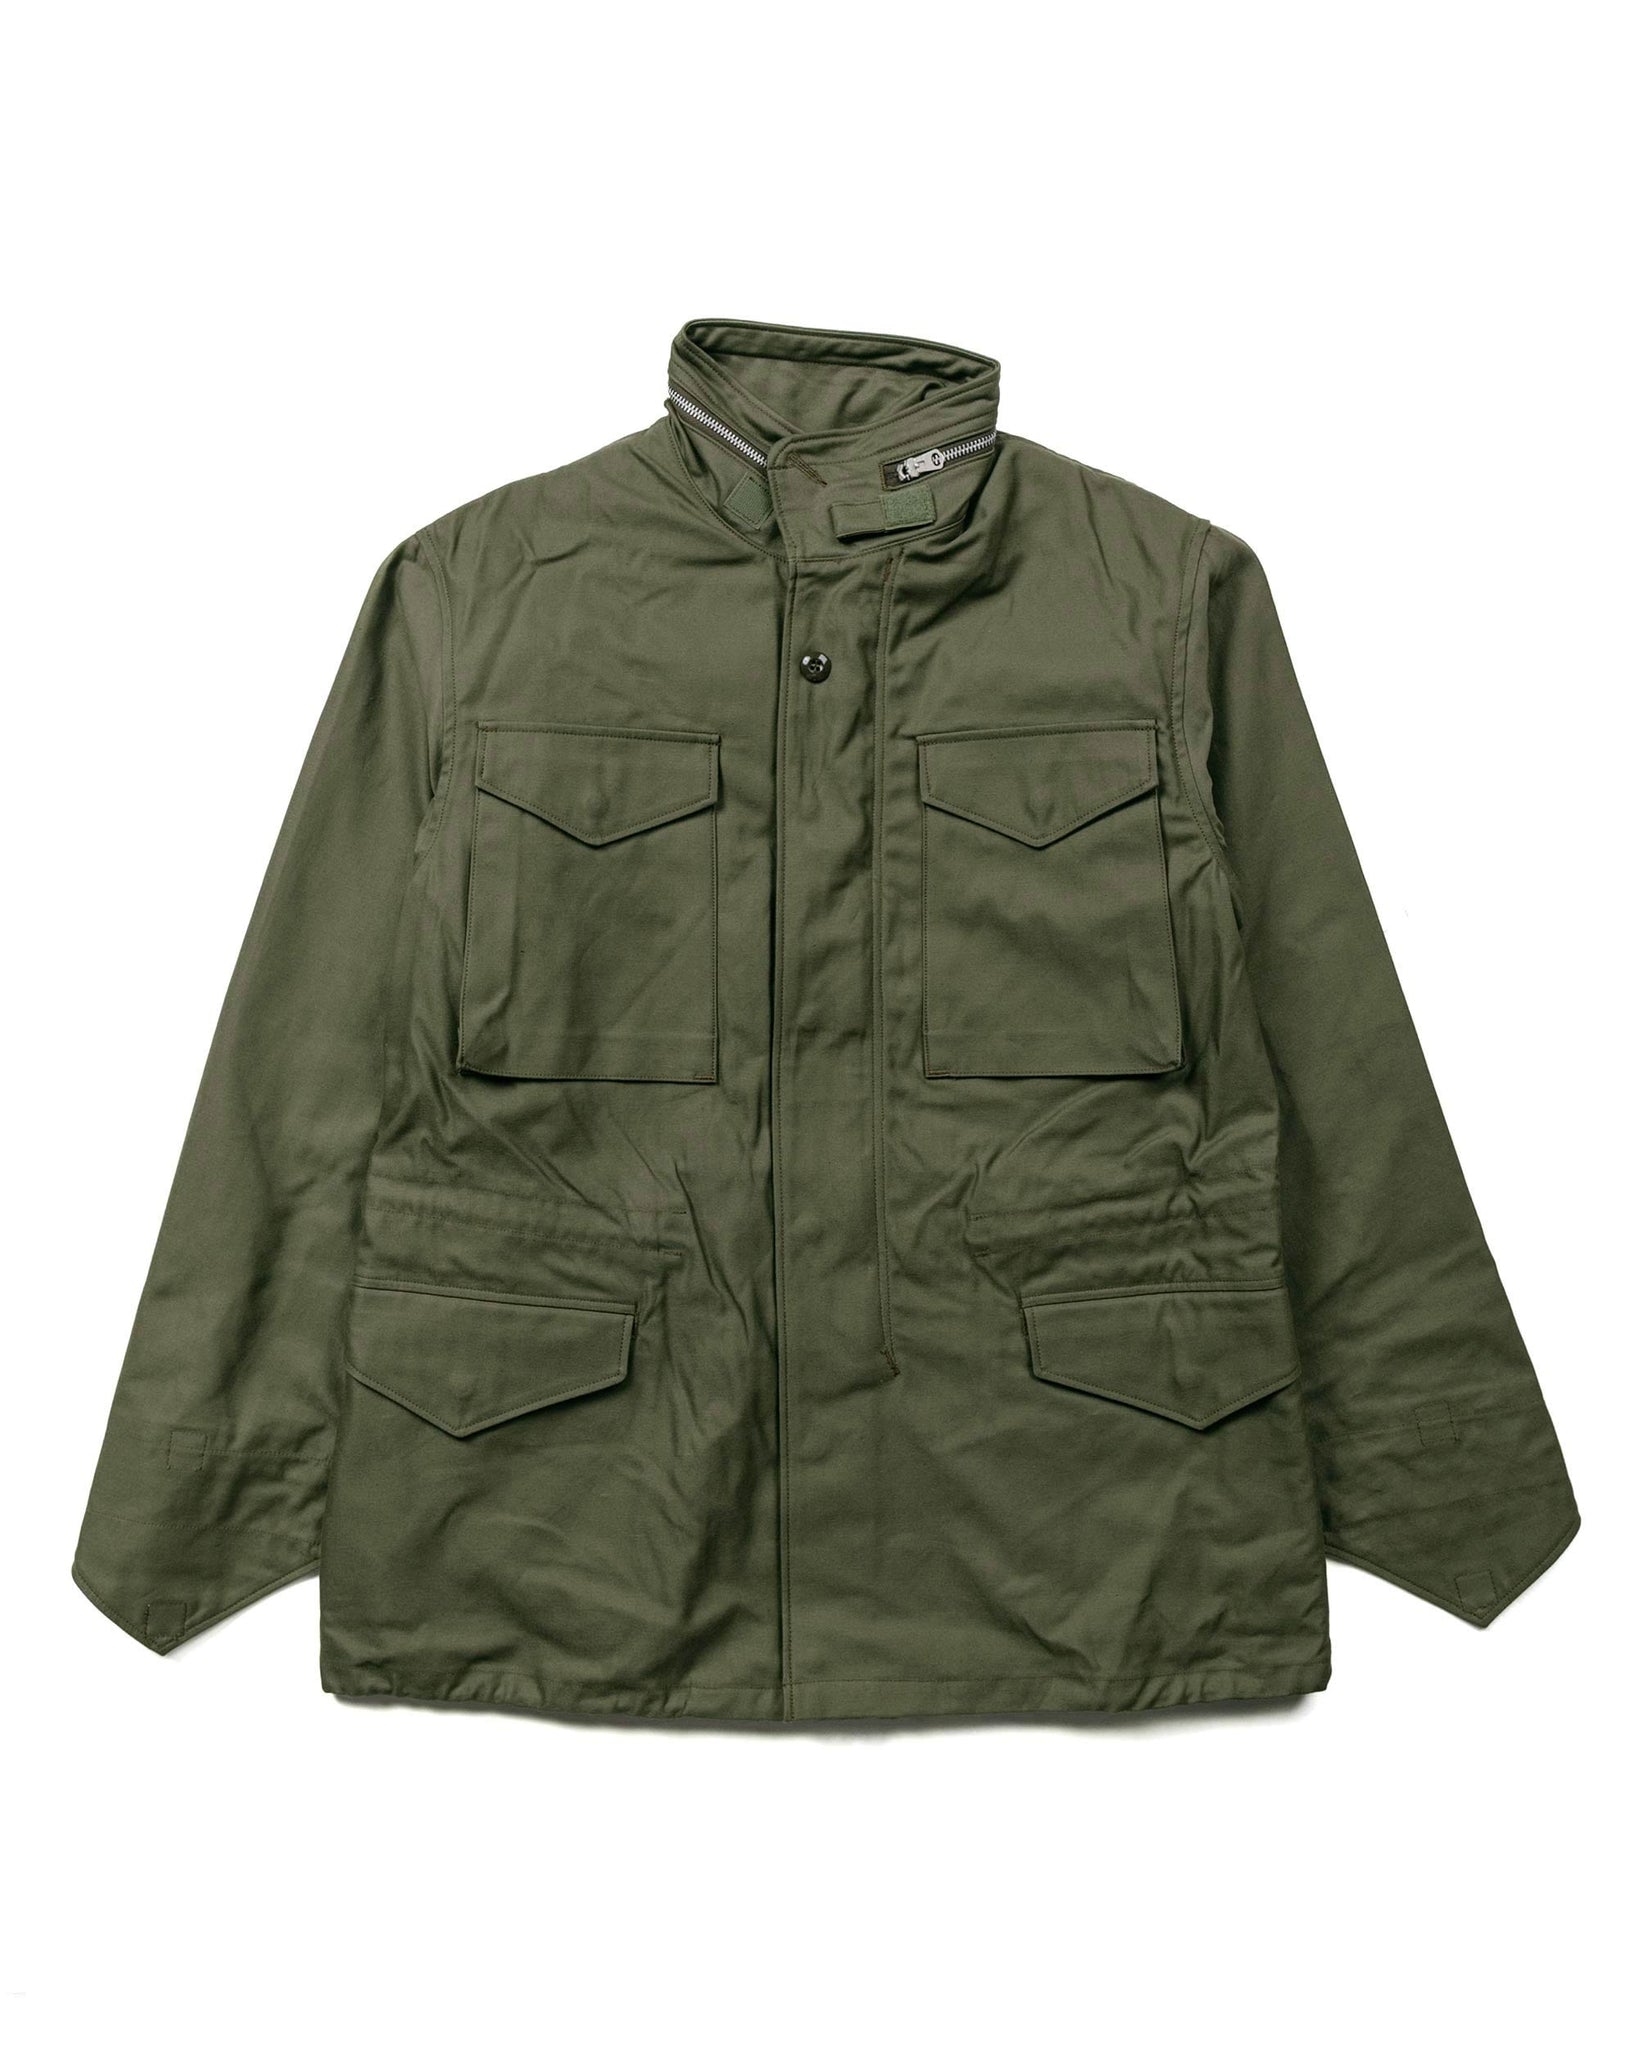 The Real McCoy's MJ23005 Coat, Man's, Field, M-65 / Early Model Olive